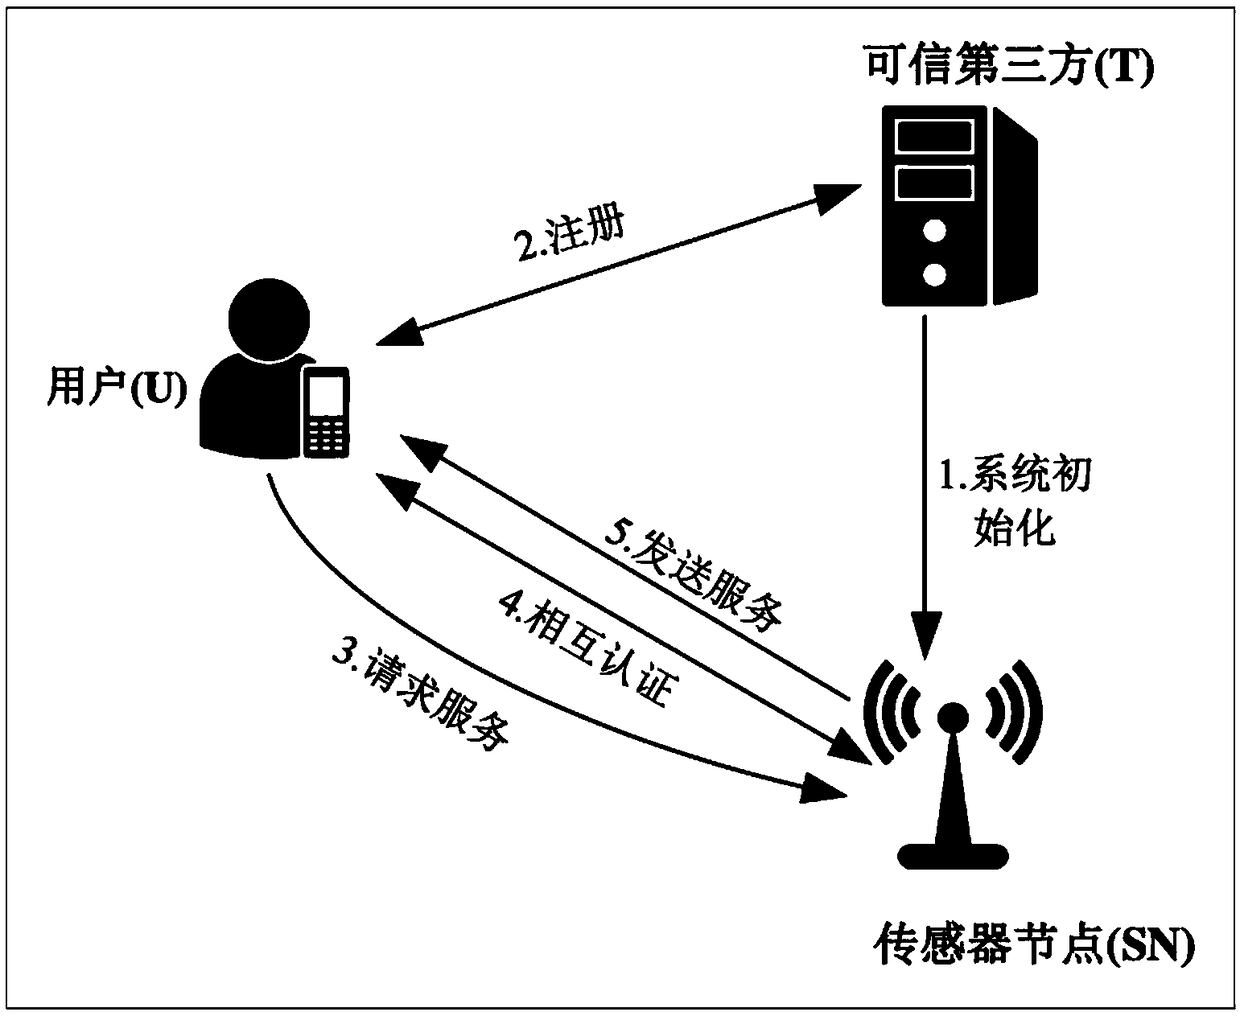 IoT (Internet of Things)-oriented user authentication and key negotiation system and method